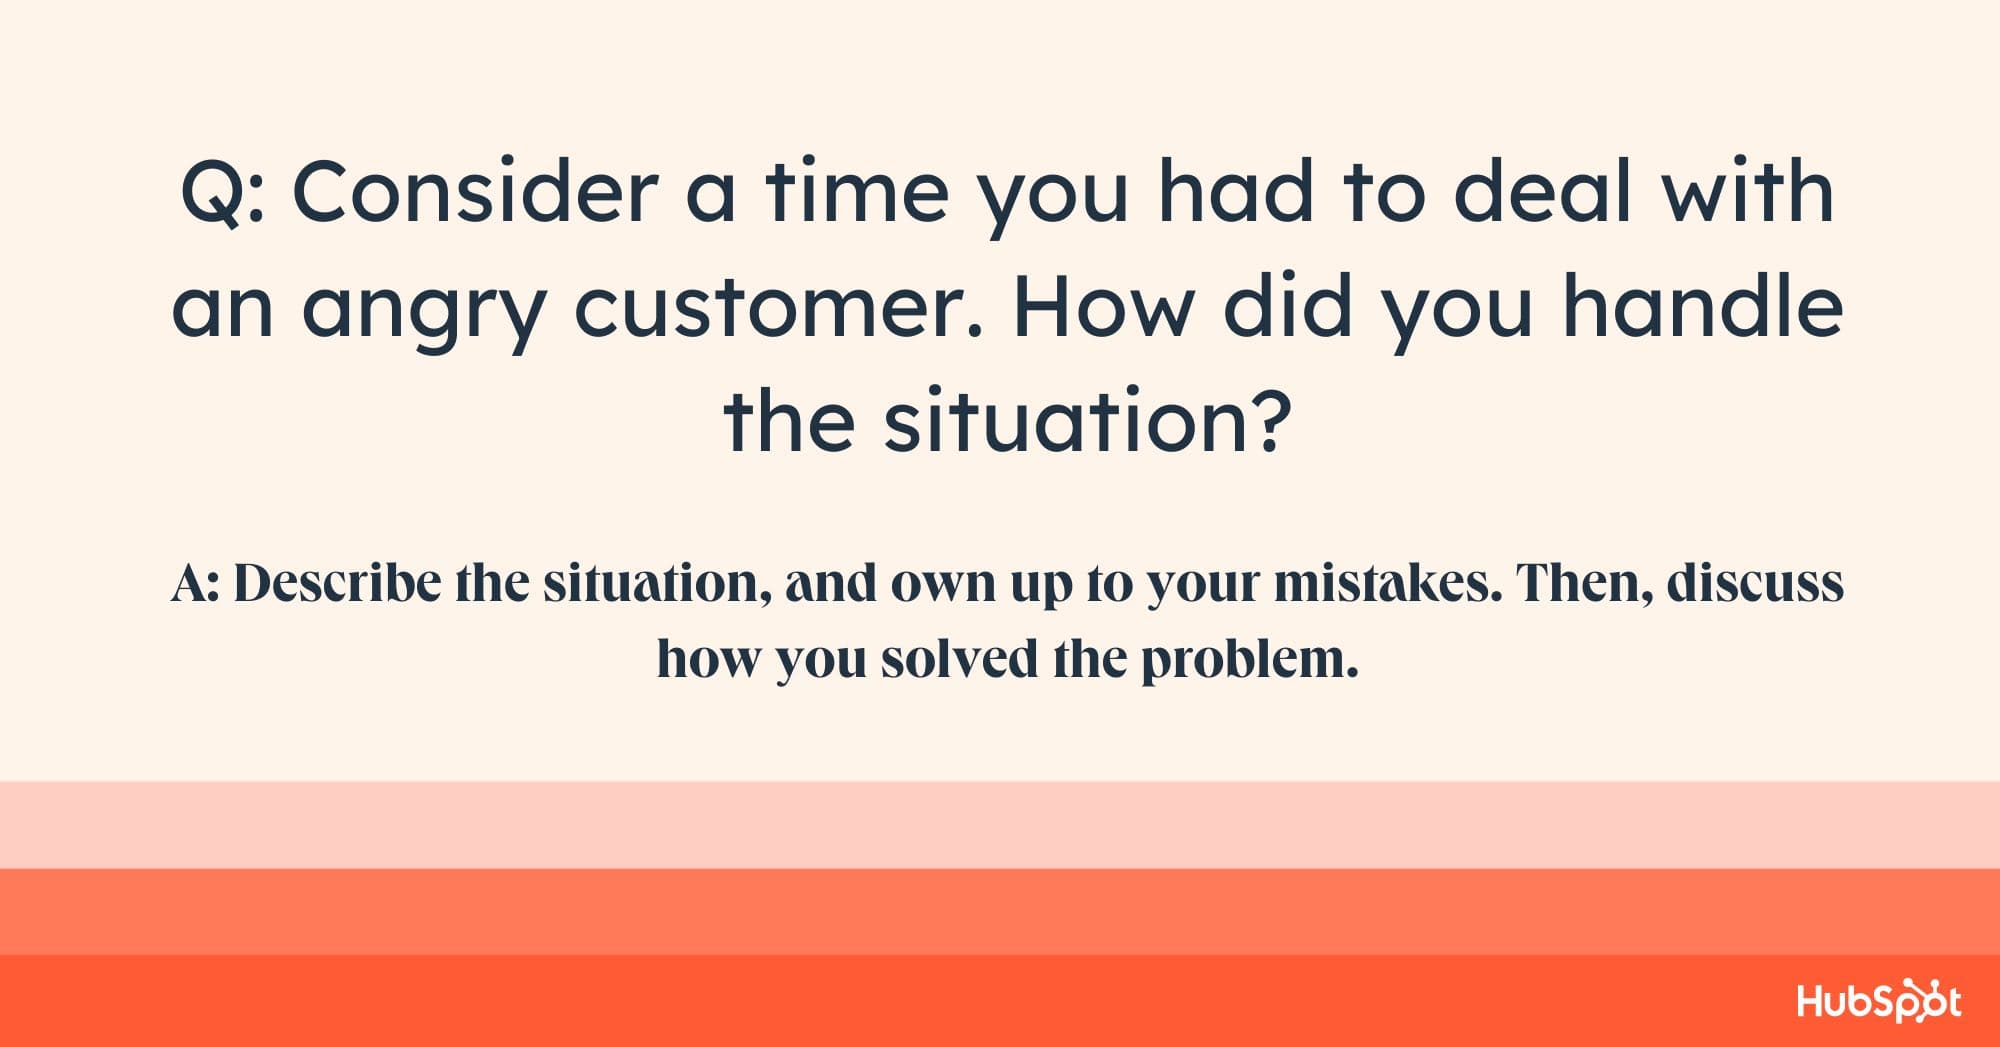 account manager interview questions, Q: Consider a time you had to deal with an angry customer. How did you handle the situation? A: Describe the situation, and own up to your mistakes. Then, discuss how you solved the problem.